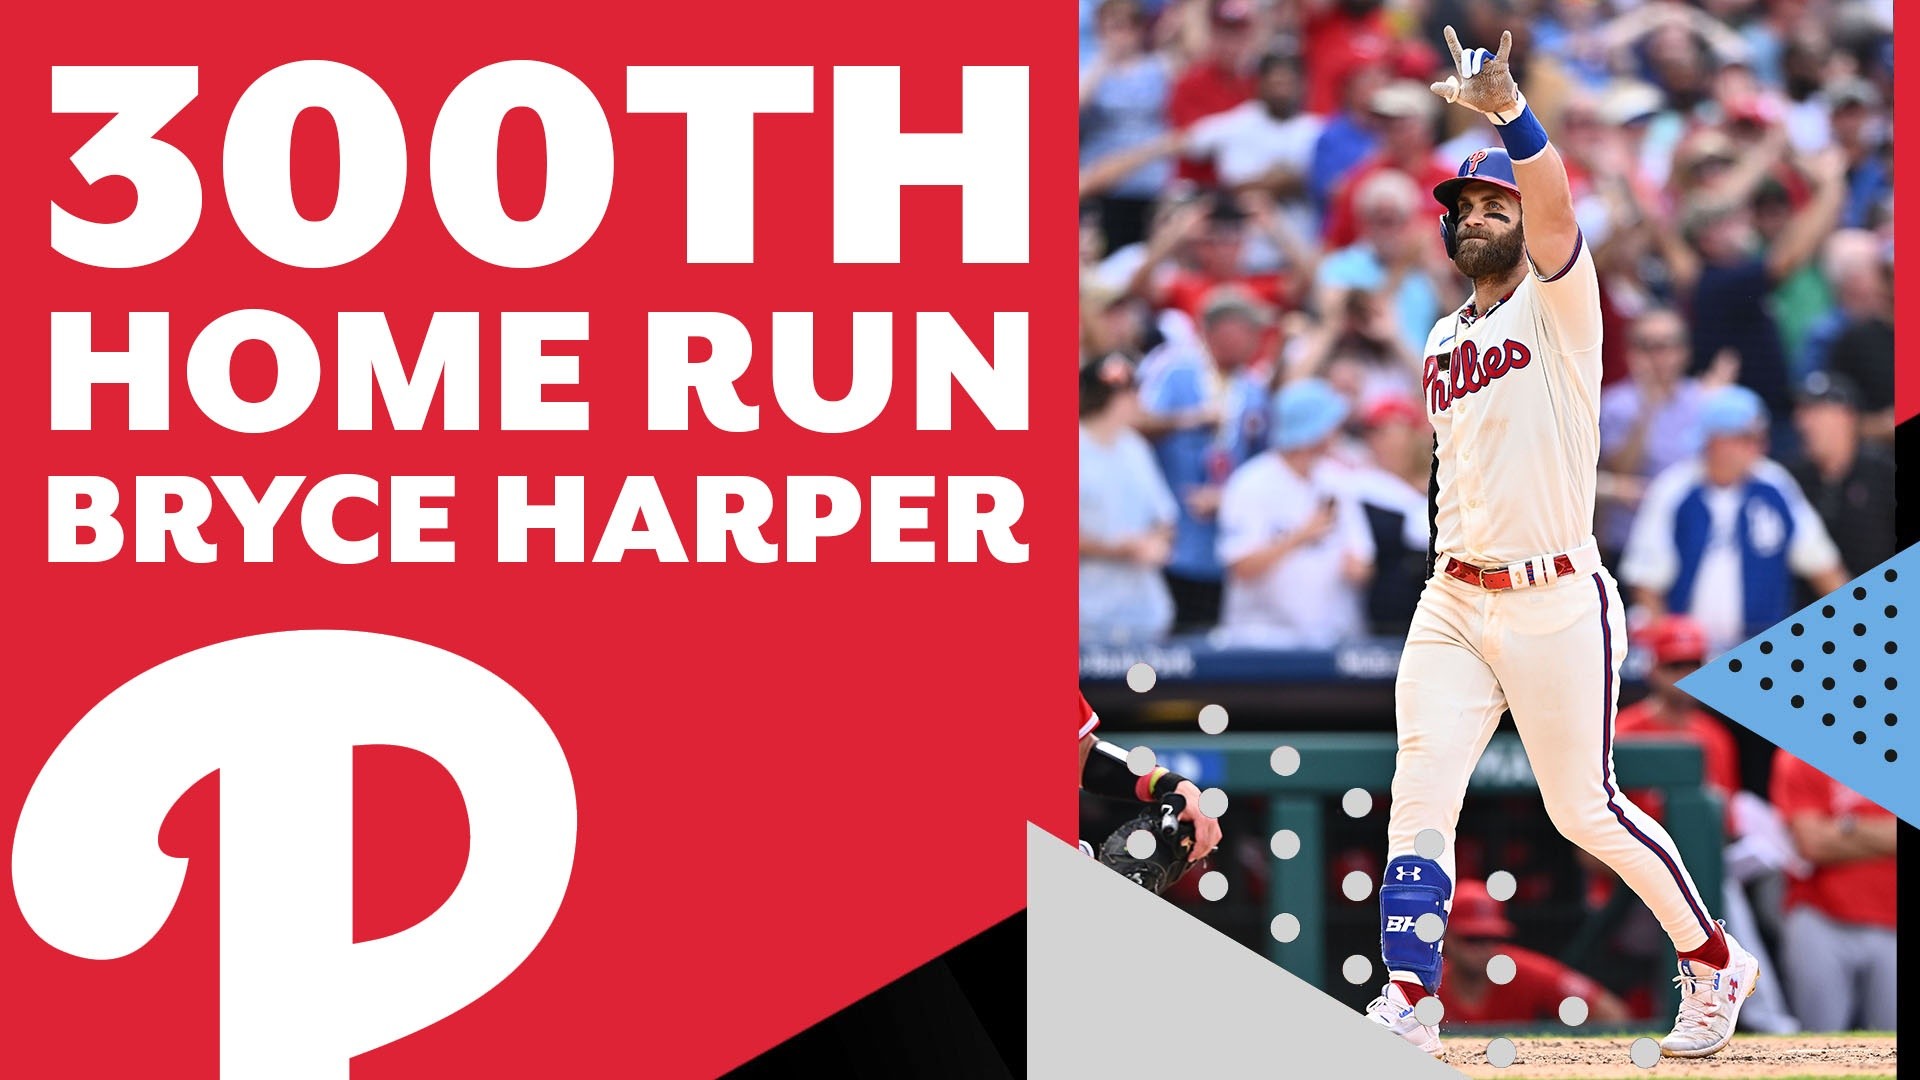 THERE GOES THAT MAN, AGAIN! BRYCE HARPER 3-RUN, SECOND DECK HOME